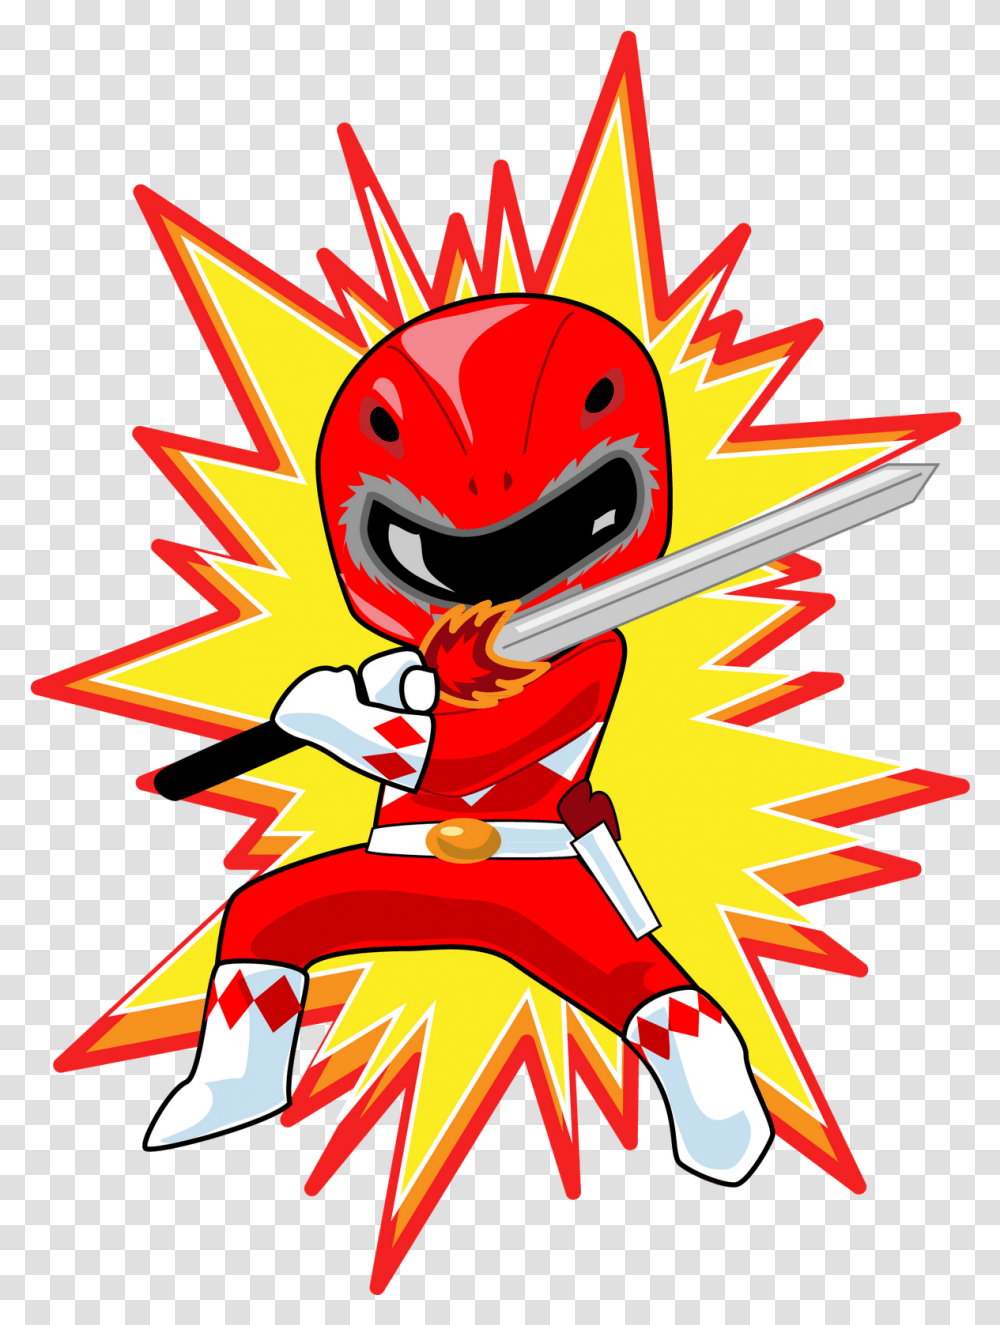 Just Thought I'd Share Power Ranger Bday Cards Clipart Red Power Ranger Chibi, Symbol, Text, Graphics, Outdoors Transparent Png